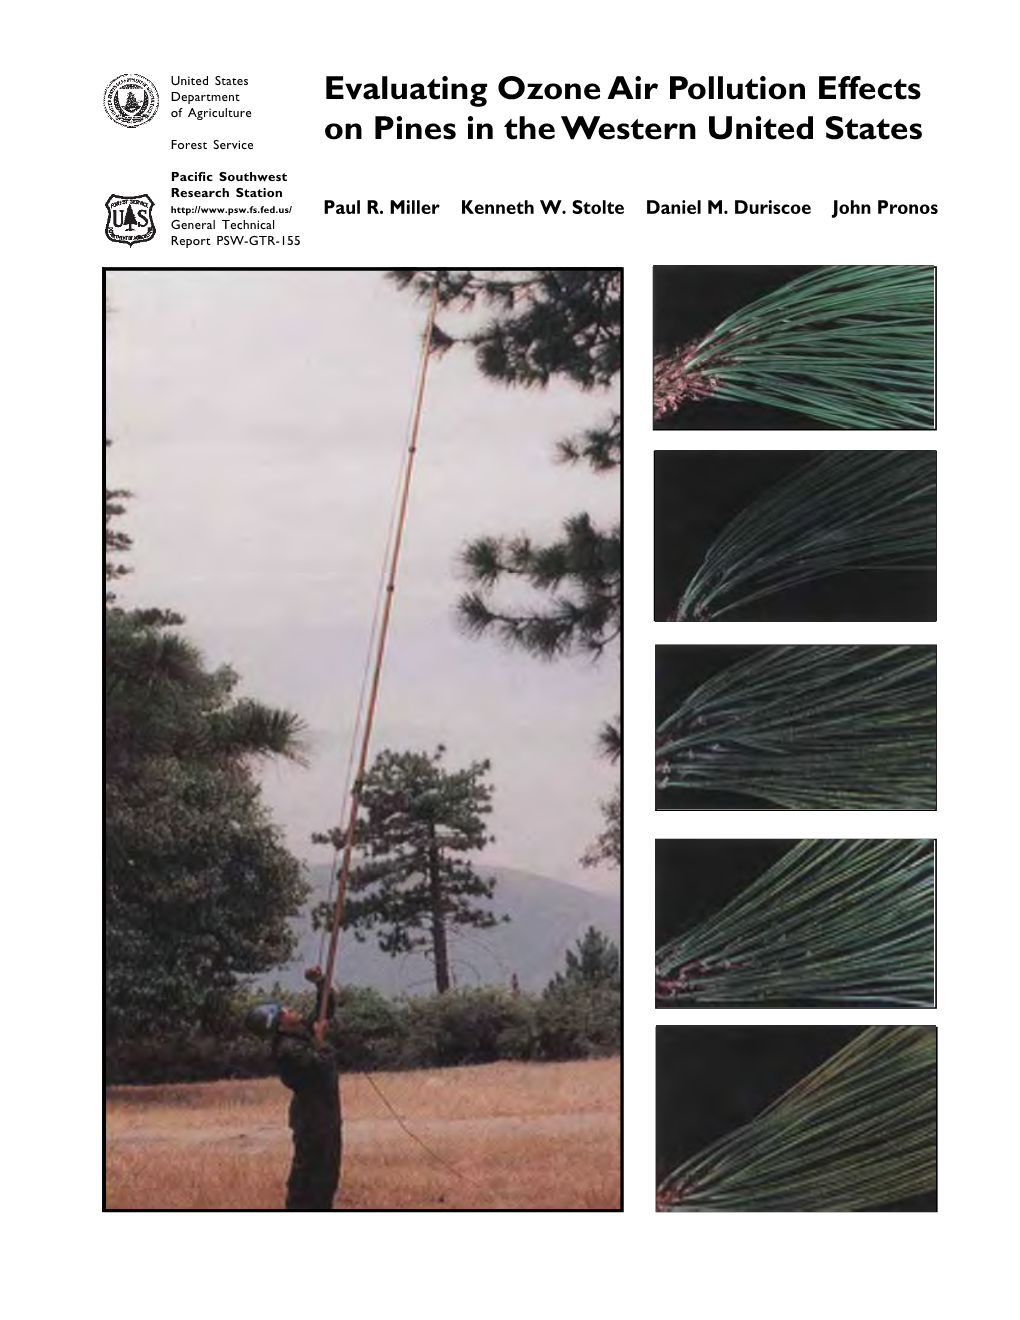 Evaluating Ozone Air Pollution Effects on Pines in the Western United States